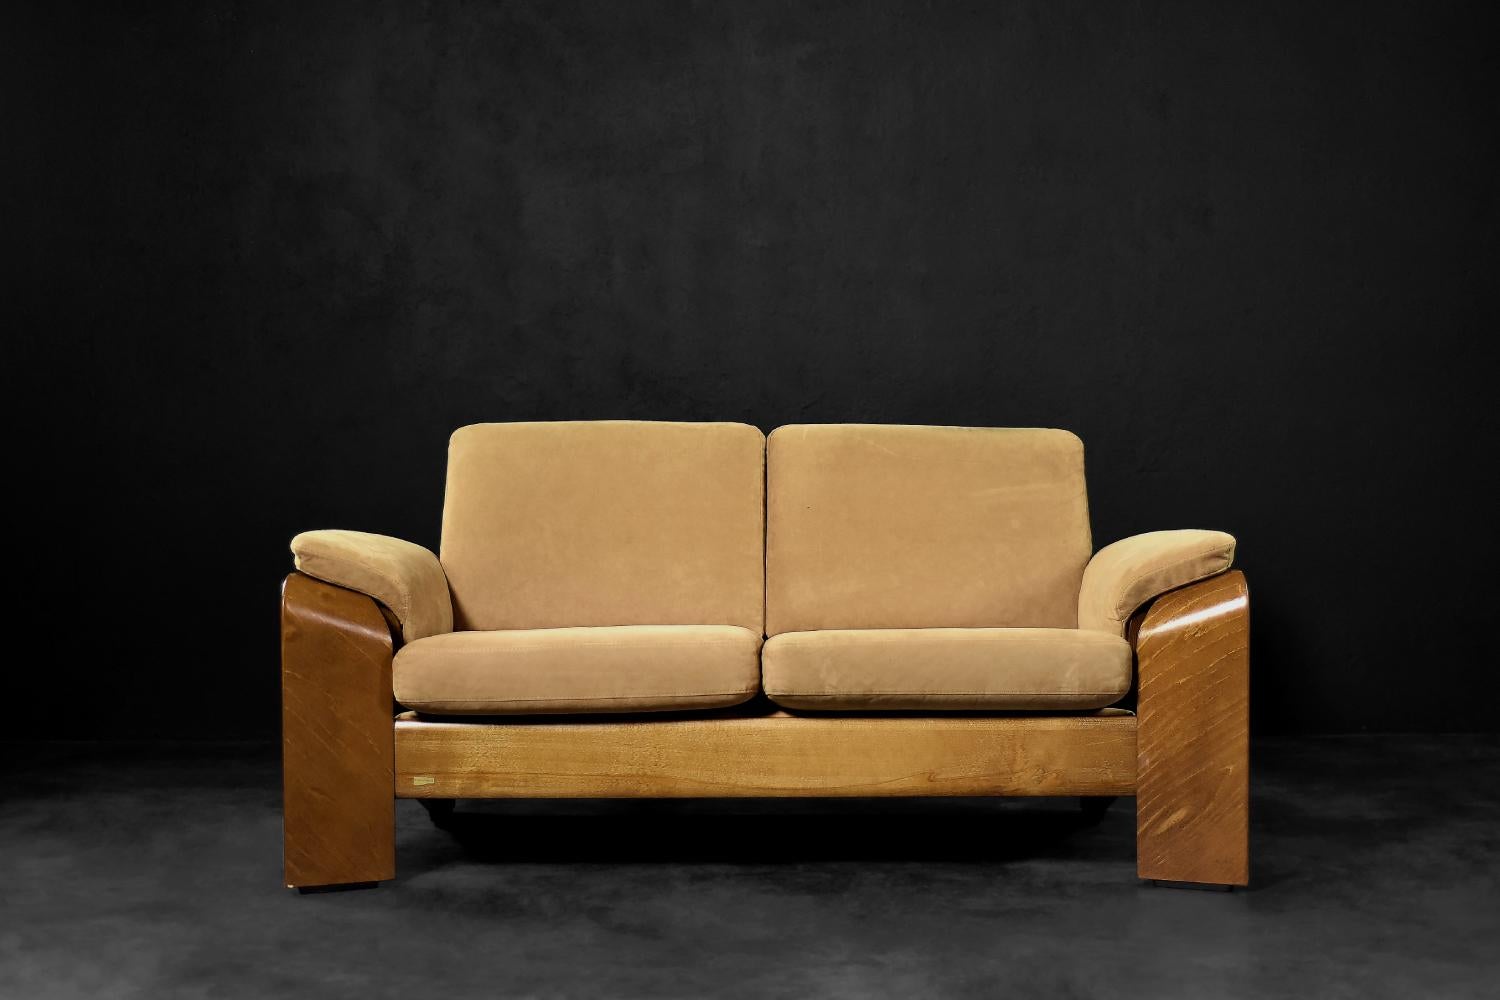 This modern two-seater sofa Pegasus Low Back Loveseat model, was manufactured by the Norwegian company Ekornes. The unconventional frame is made of bent teak wood in a warm shade of brown. Curved armrests flow smoothly into wide, rectangular legs.